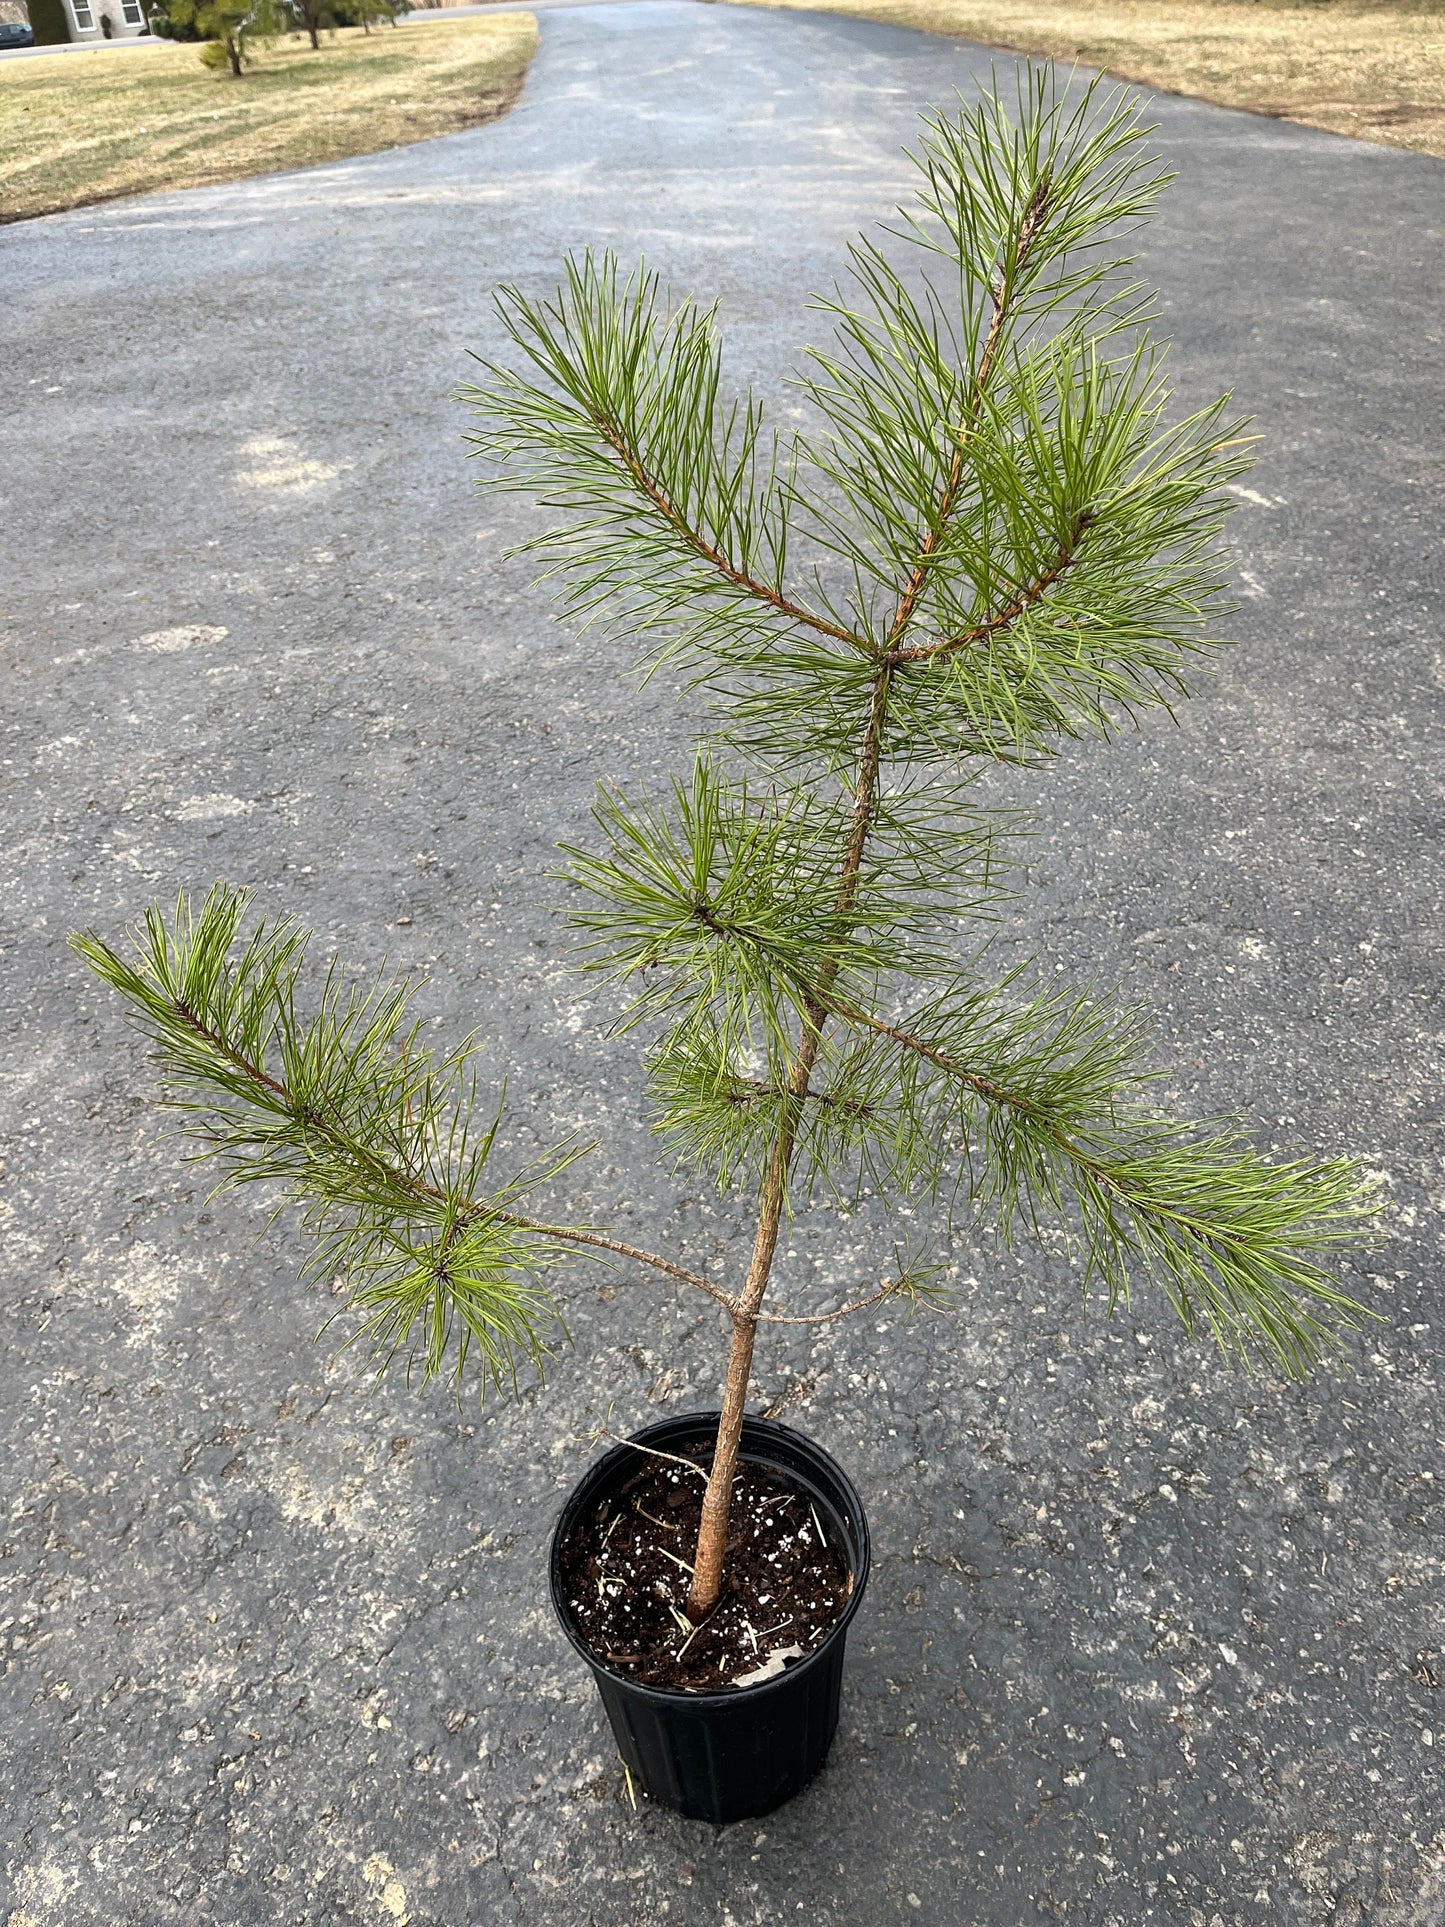 Pitch Pine Seedling - 1 to 3 Feet - Native - Rescues Available - Grown from Seed (Better and More Natural Quality) - Live Plant